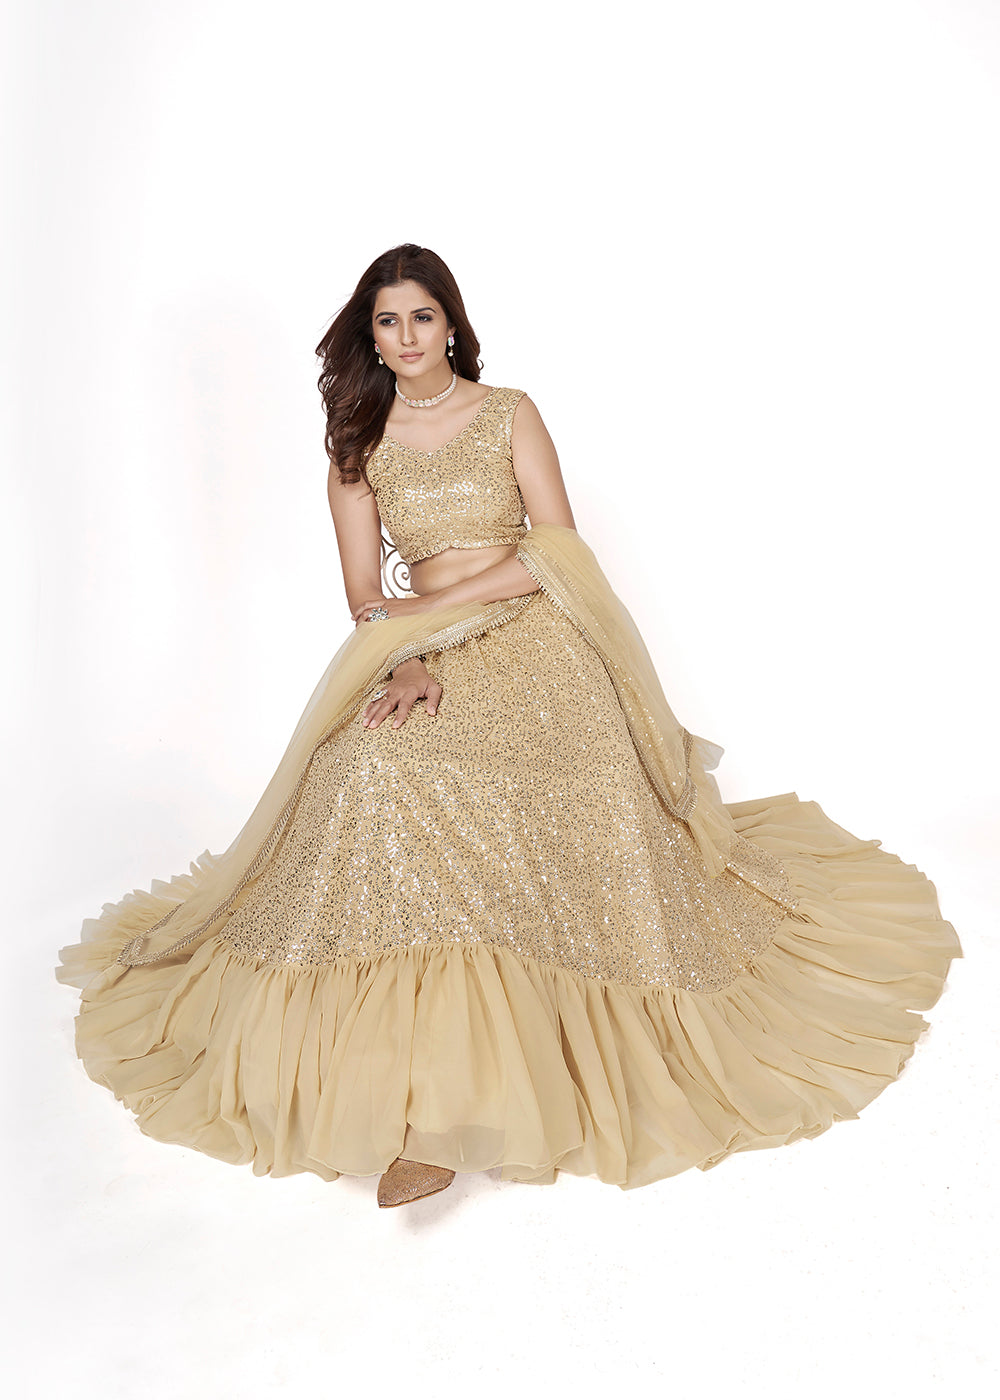 Buy Now Cream Multi Sequins Embroidered Party Wear Lehenga Choli Online in USA, UK, Canada & Worldwide at Empress Clothing. 